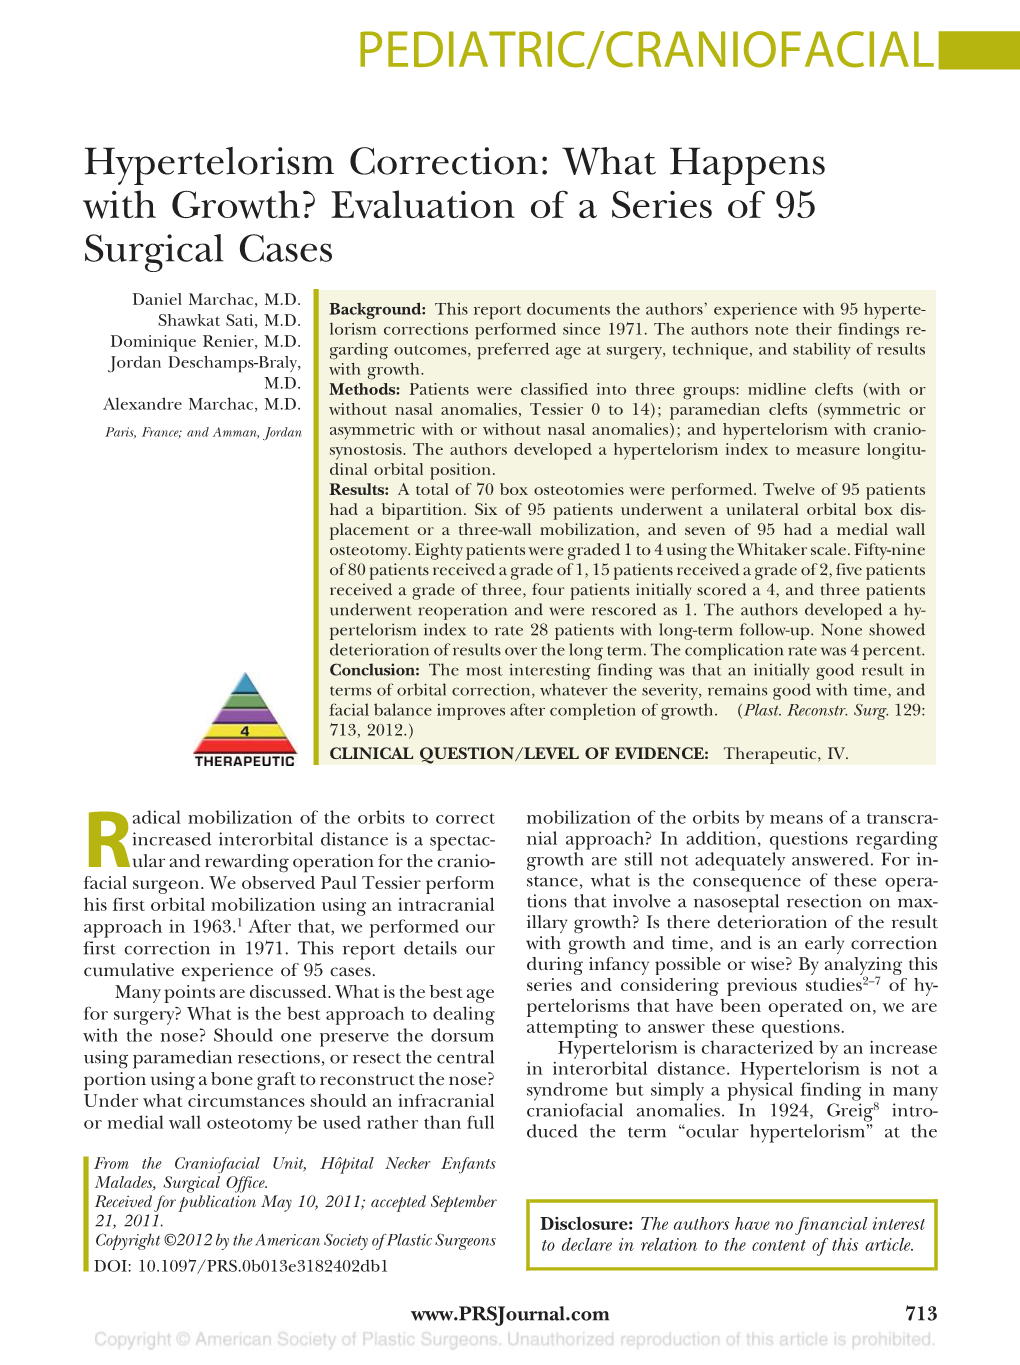 Hypertelorism Correction: What Happens with Growth? Evaluation of a Series of 95 Surgical Cases